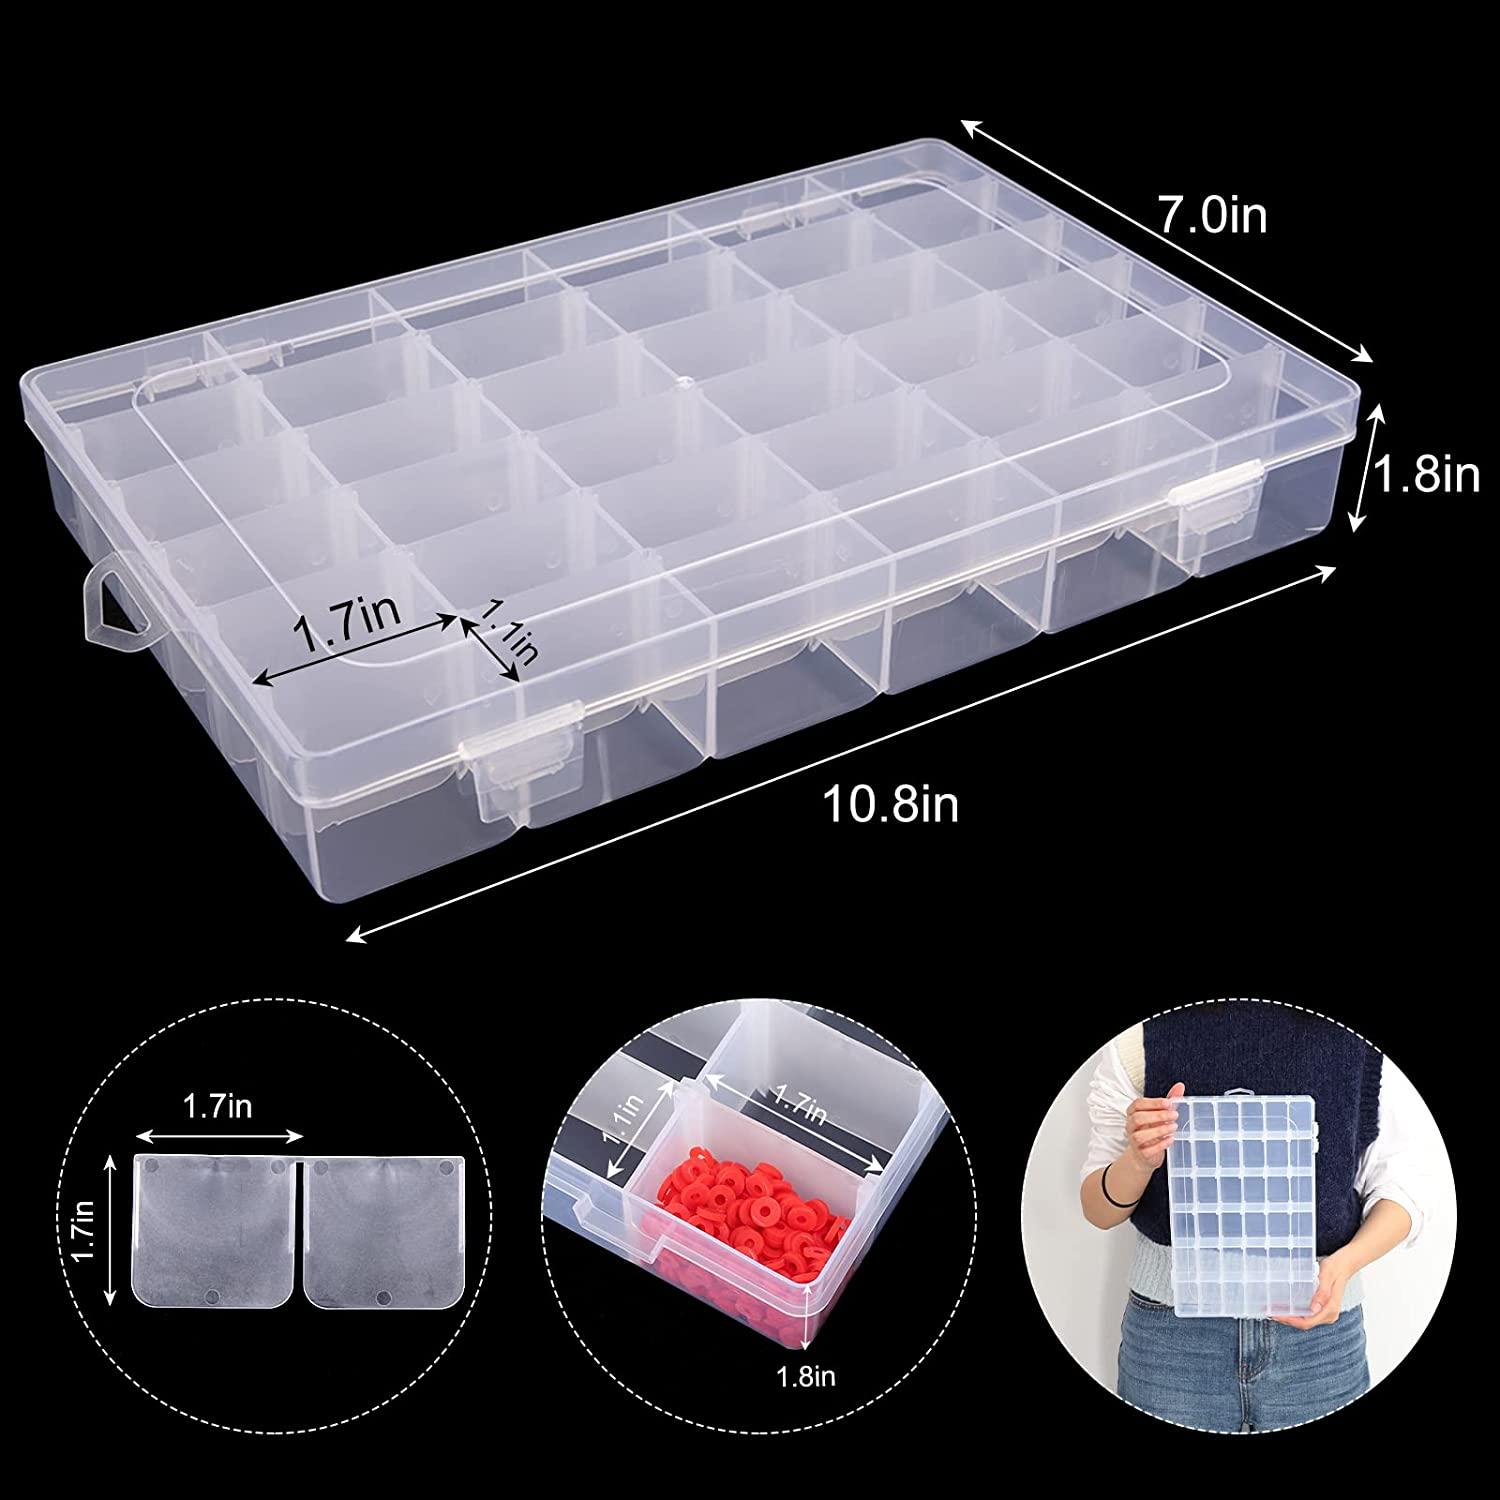 OUTUXED 36 Grids Clear Plastic Organizer Box with Adjustable